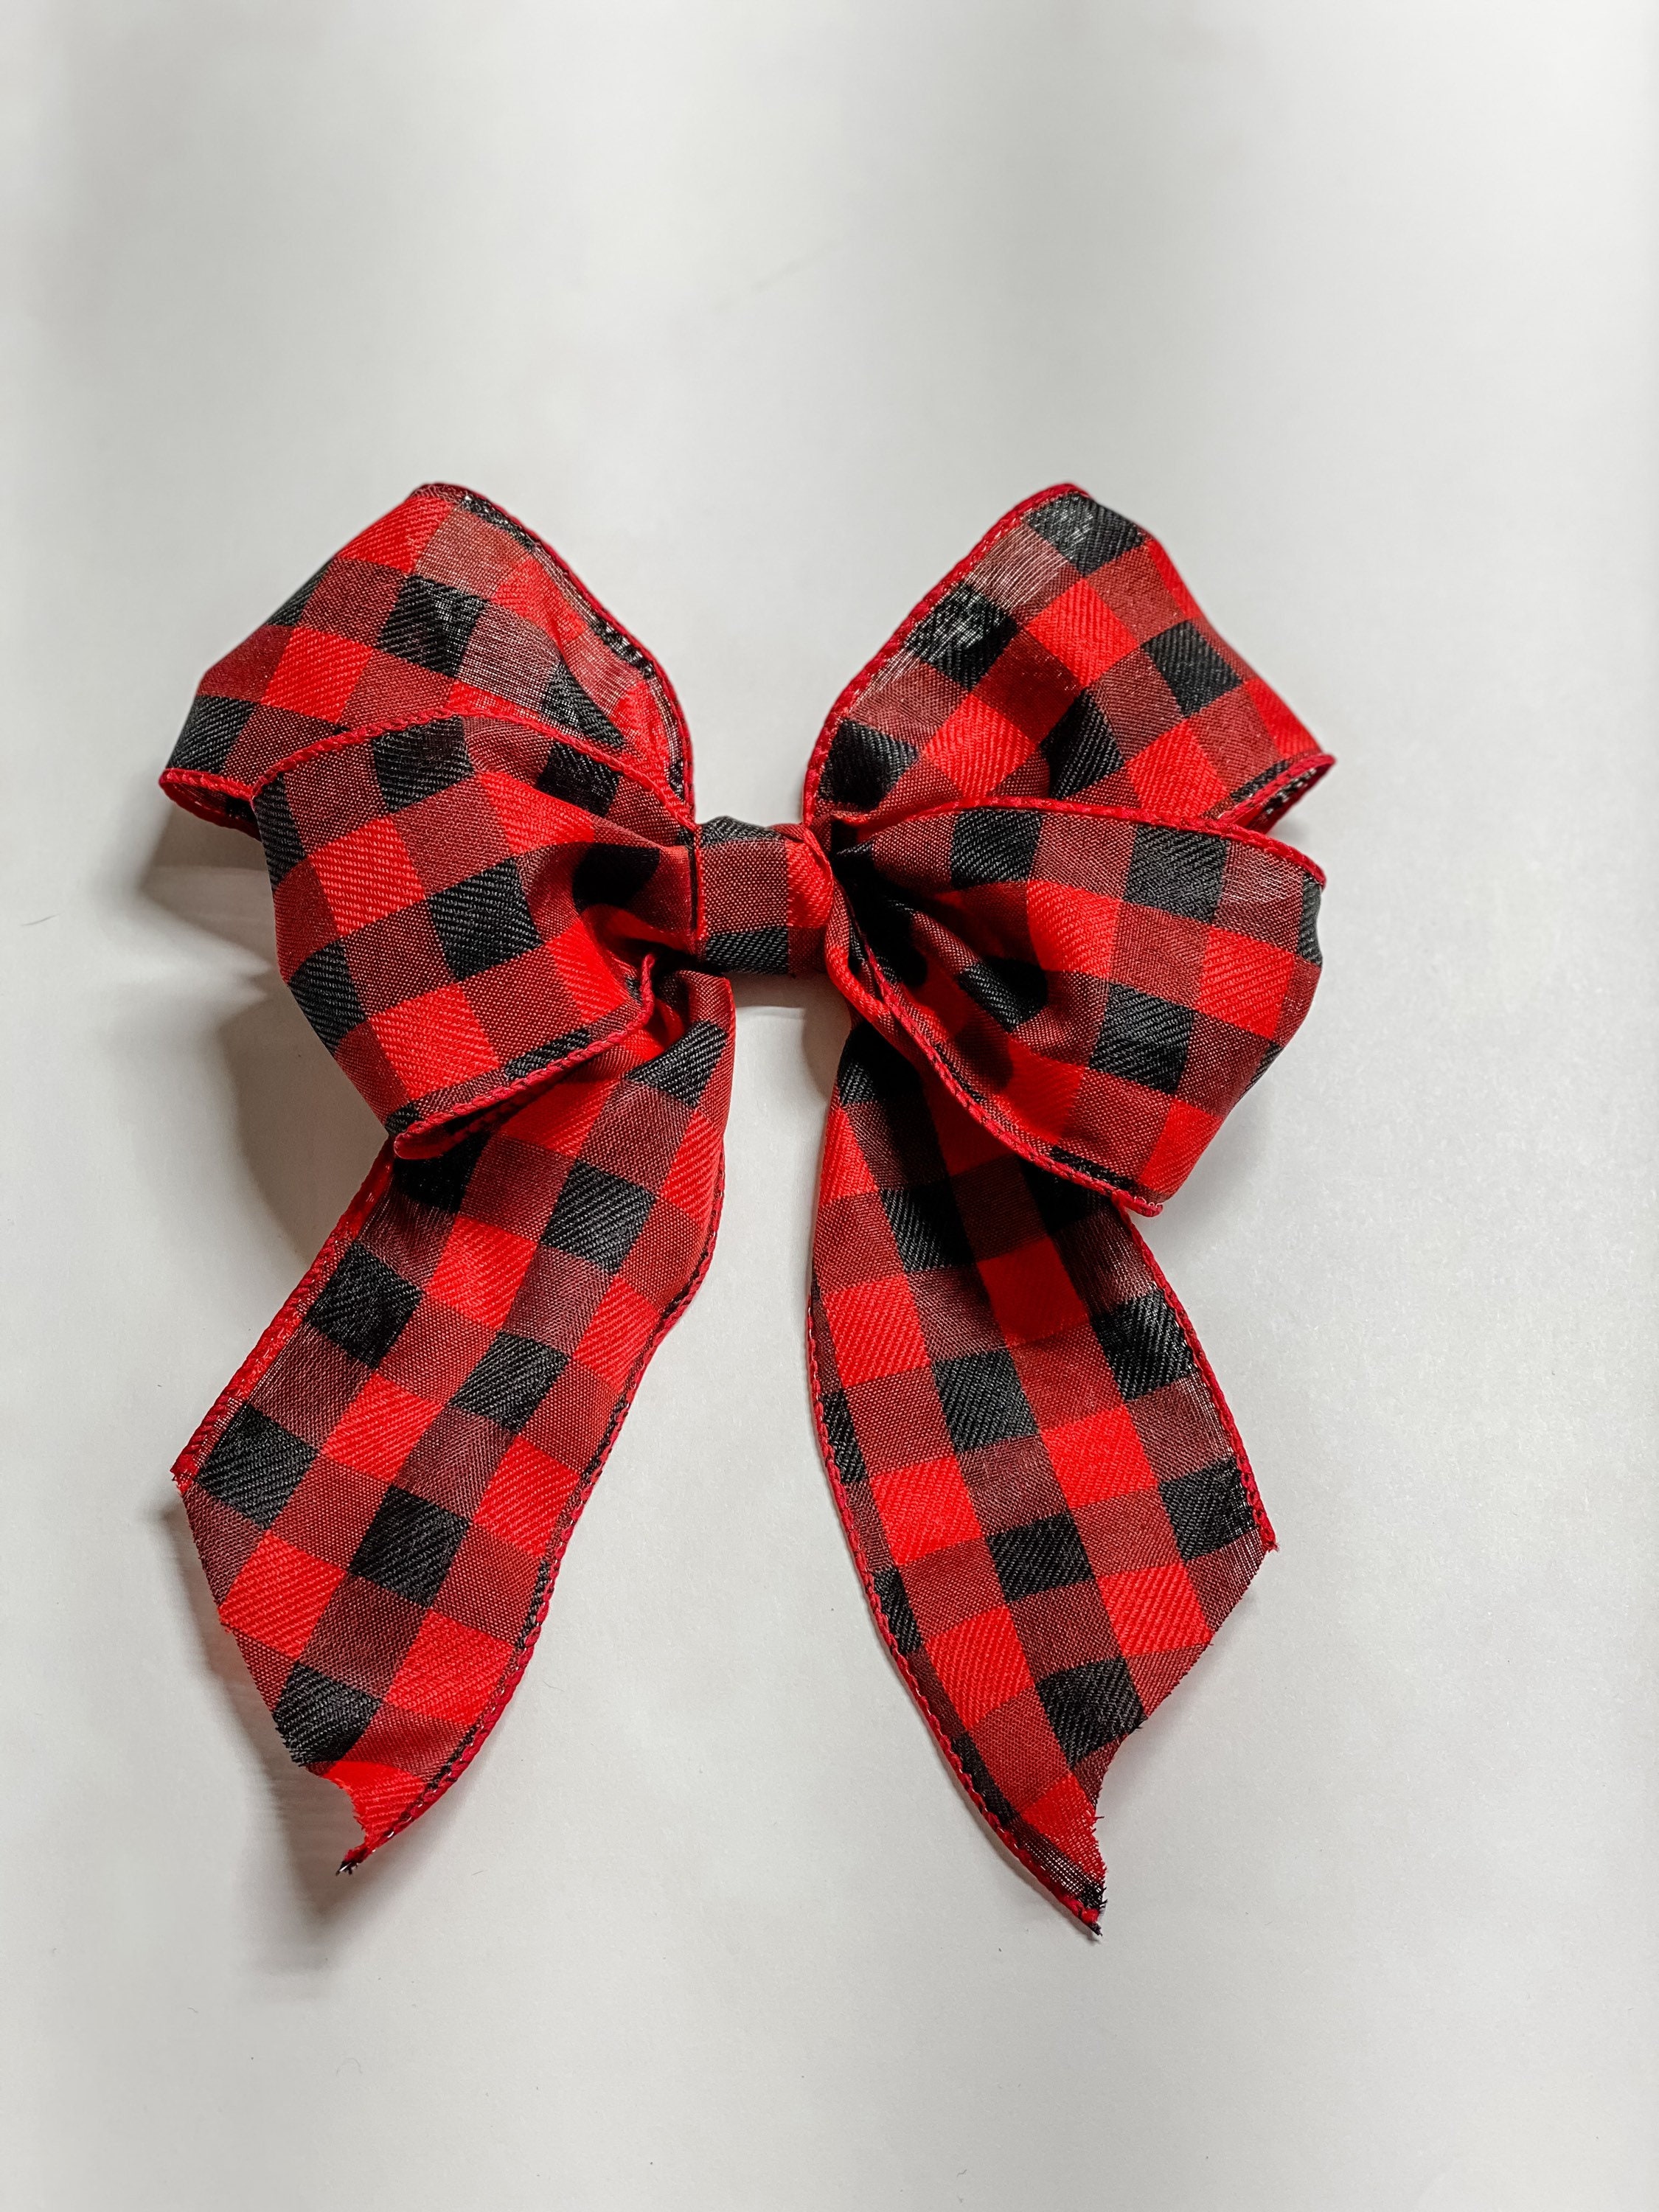 Plaid Gift for - Present Loop / Wreaths Double Bow or Red Buffalo Add or Signs for Black Etsy Bow Österreich On